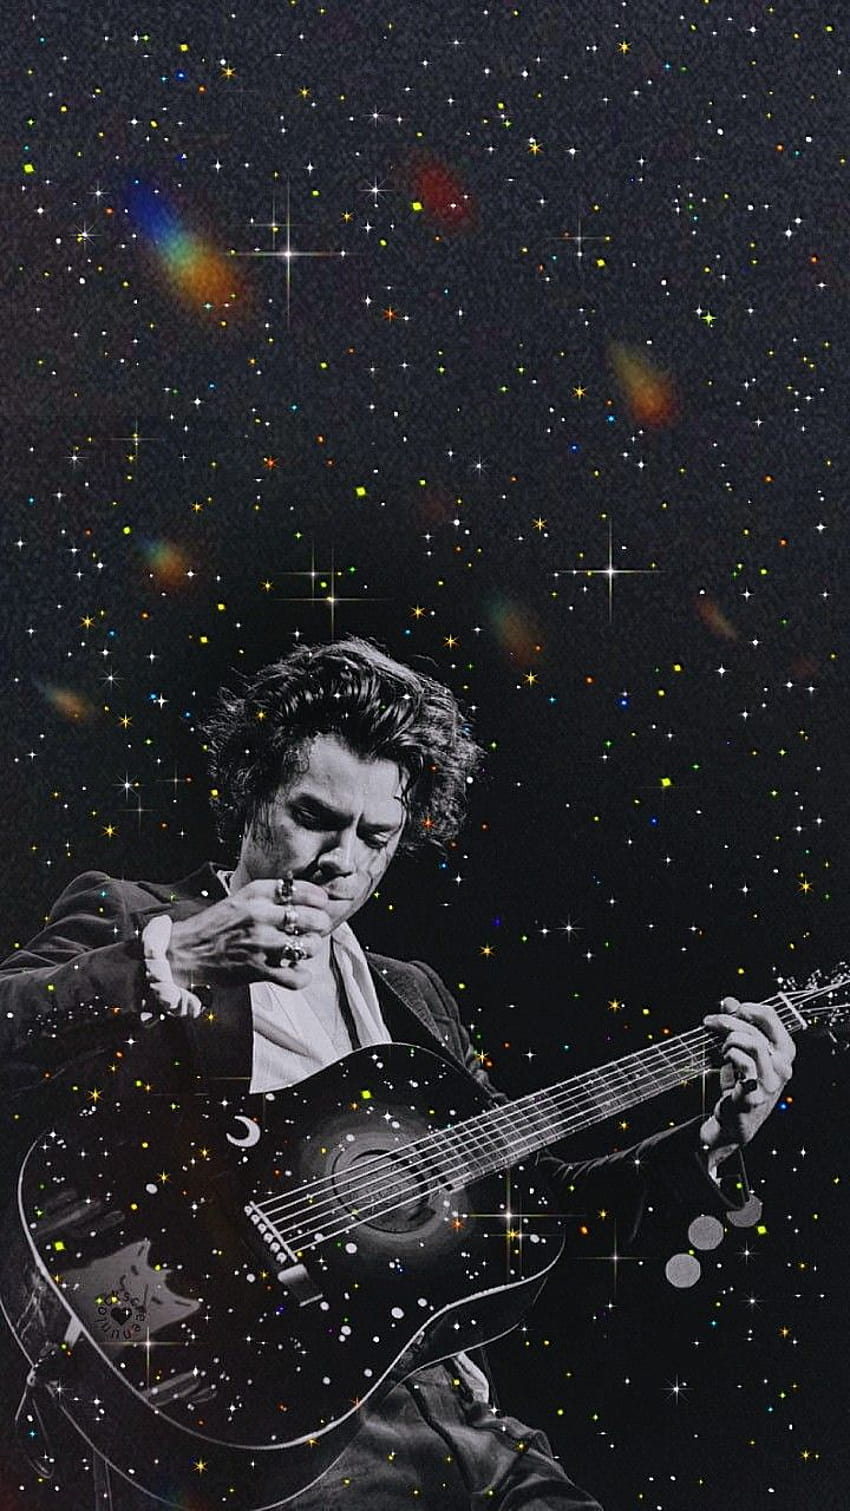 A man playing guitar with stars in the background - Harry Styles